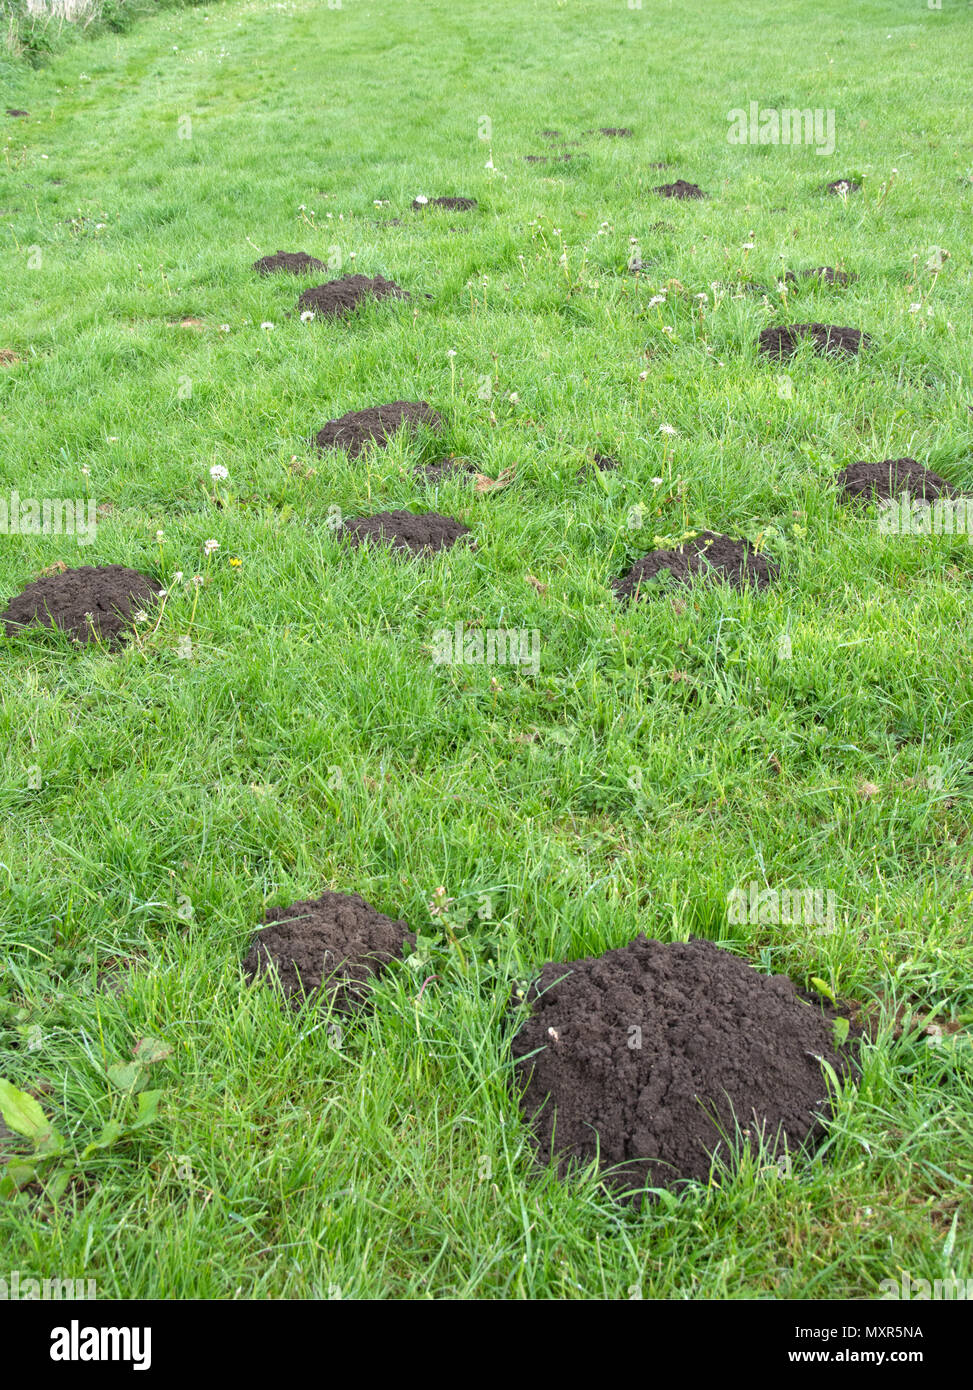 Mole Hills in grass A molehill (or mole-hill, mole mound) is a conical mound of loose soil raised by small burrowing mammals, Stock Photo